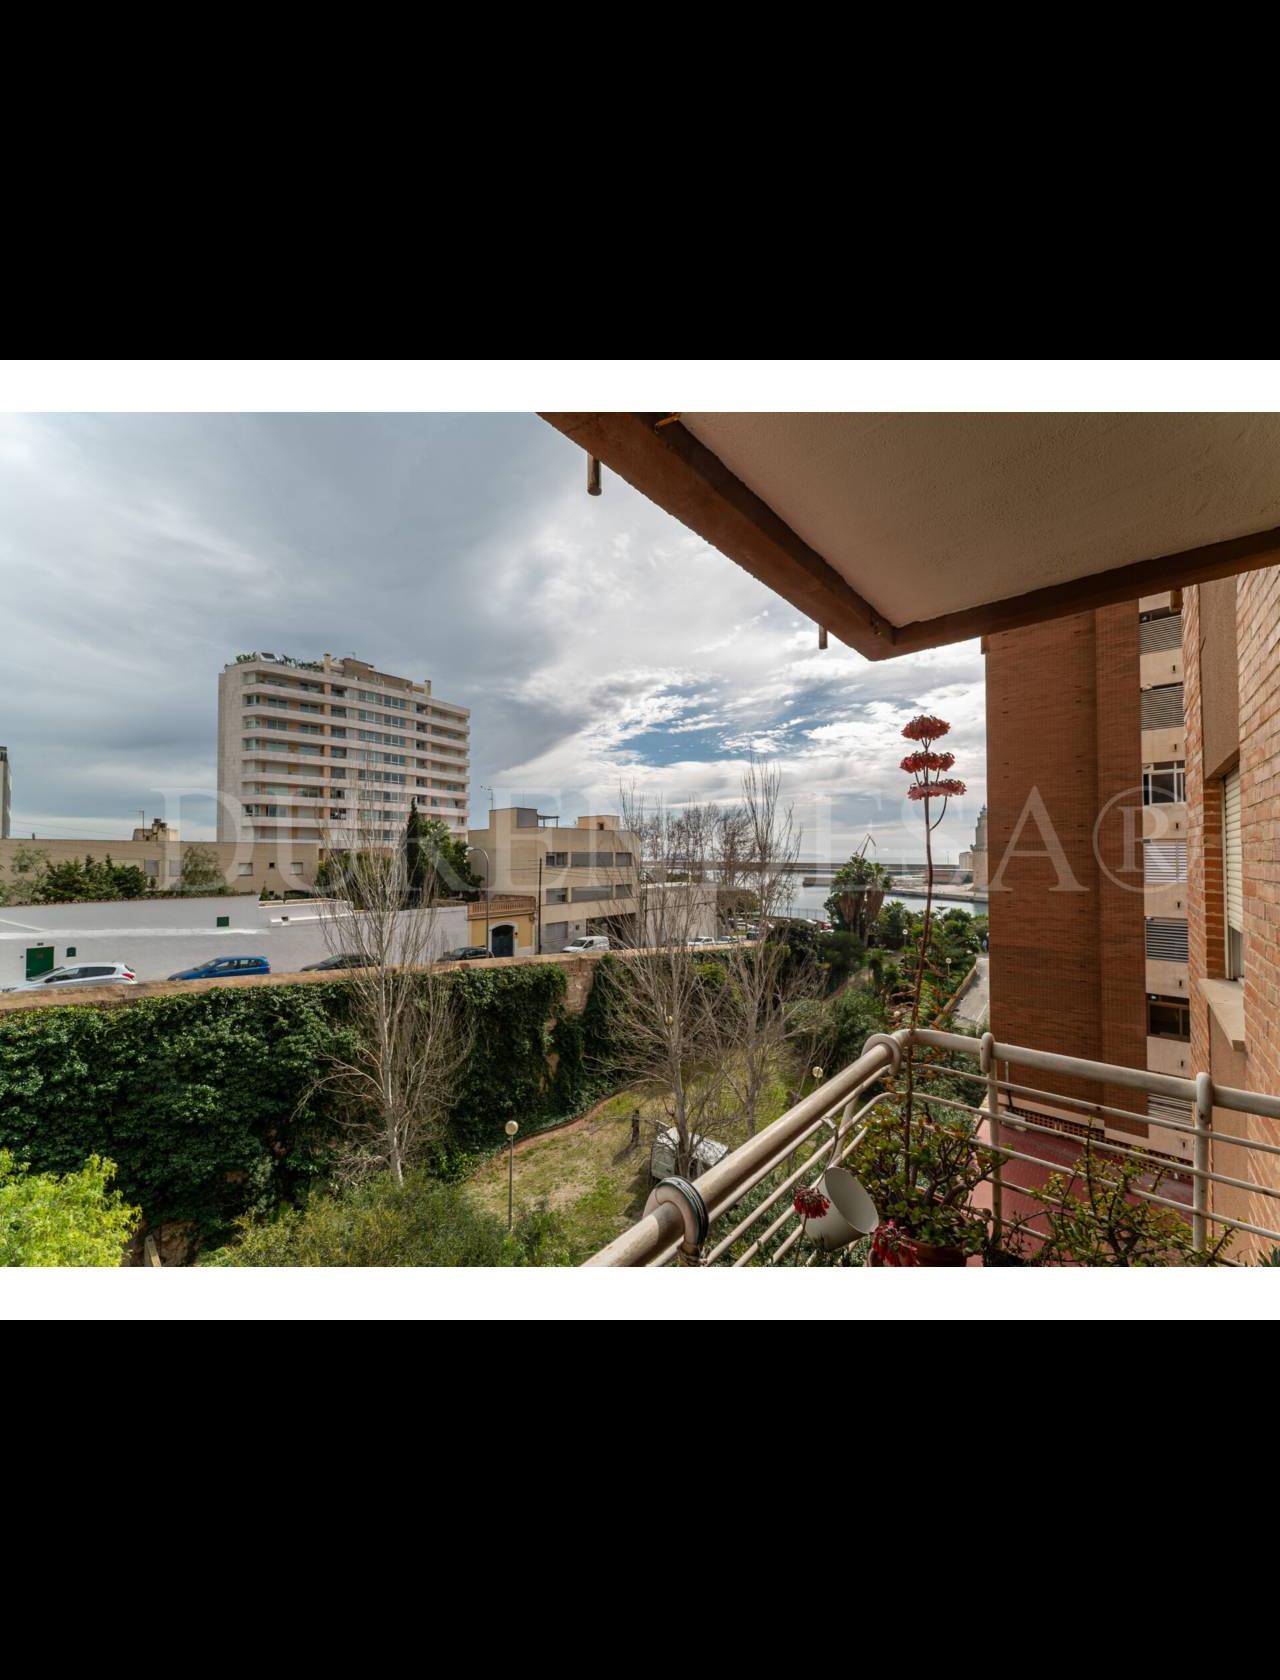 Flat for sale with see views in Porto Pi, Palma